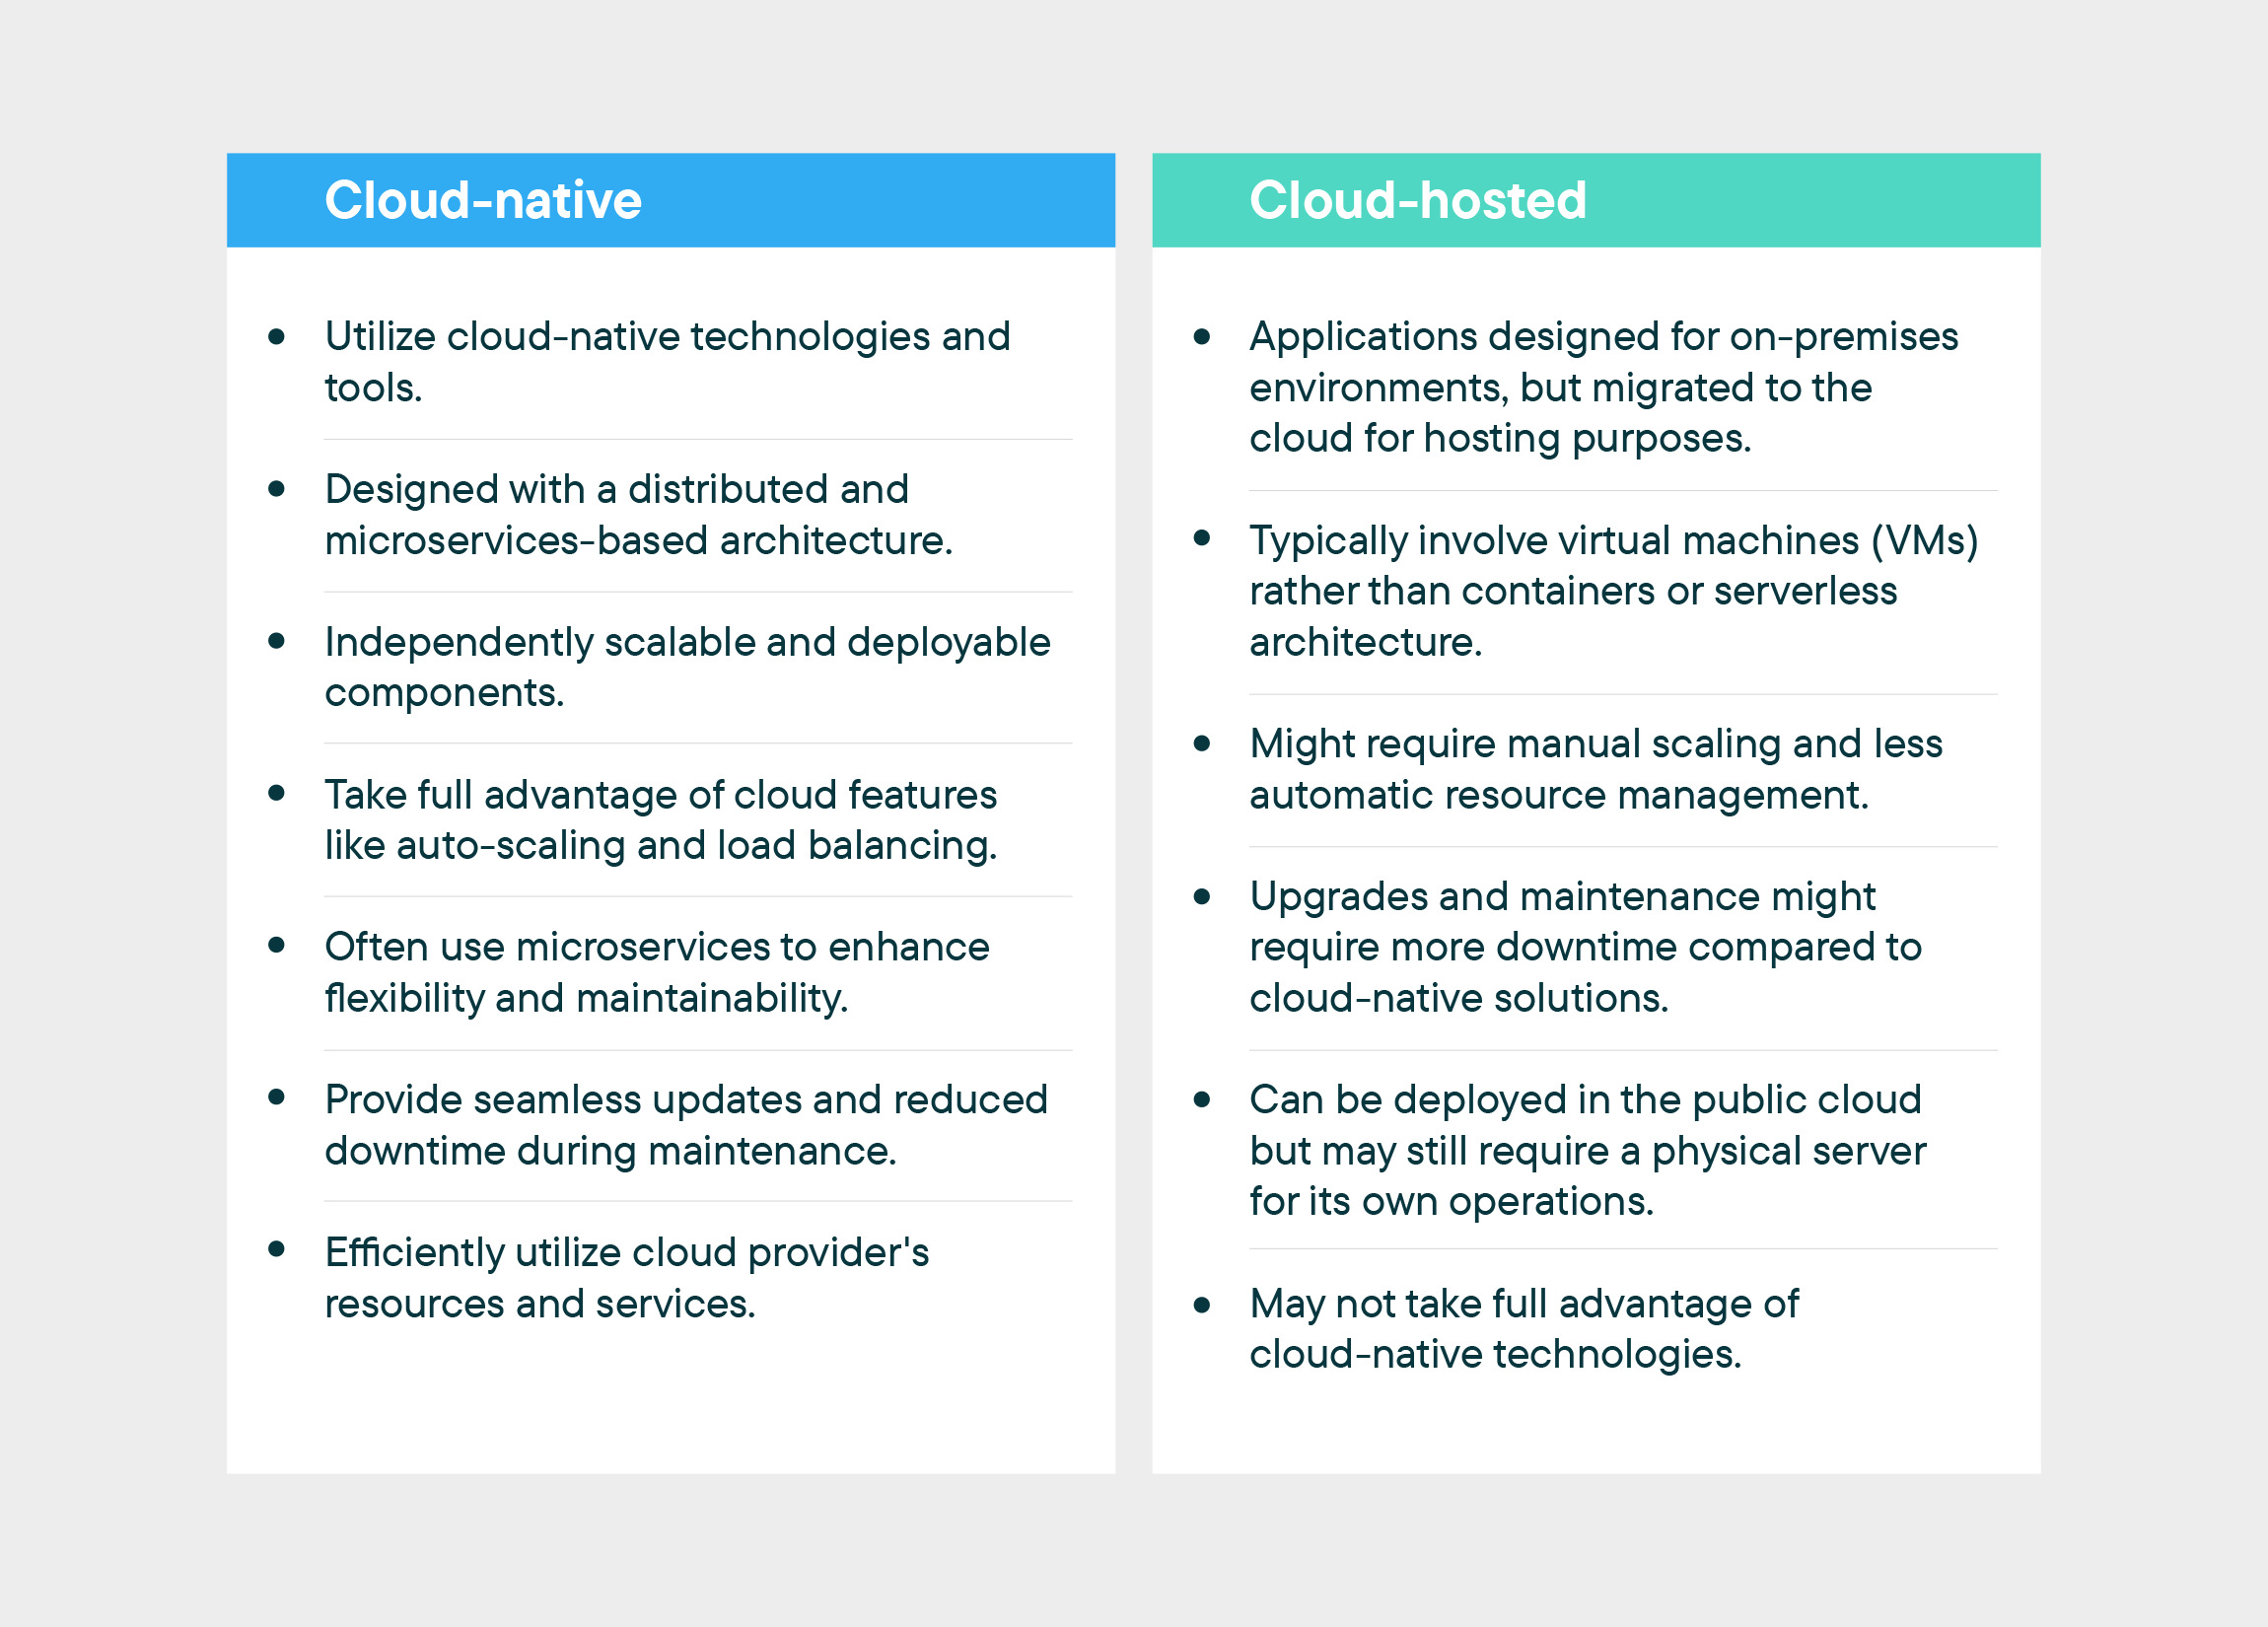 The differences between cloud-hosted and cloud-native